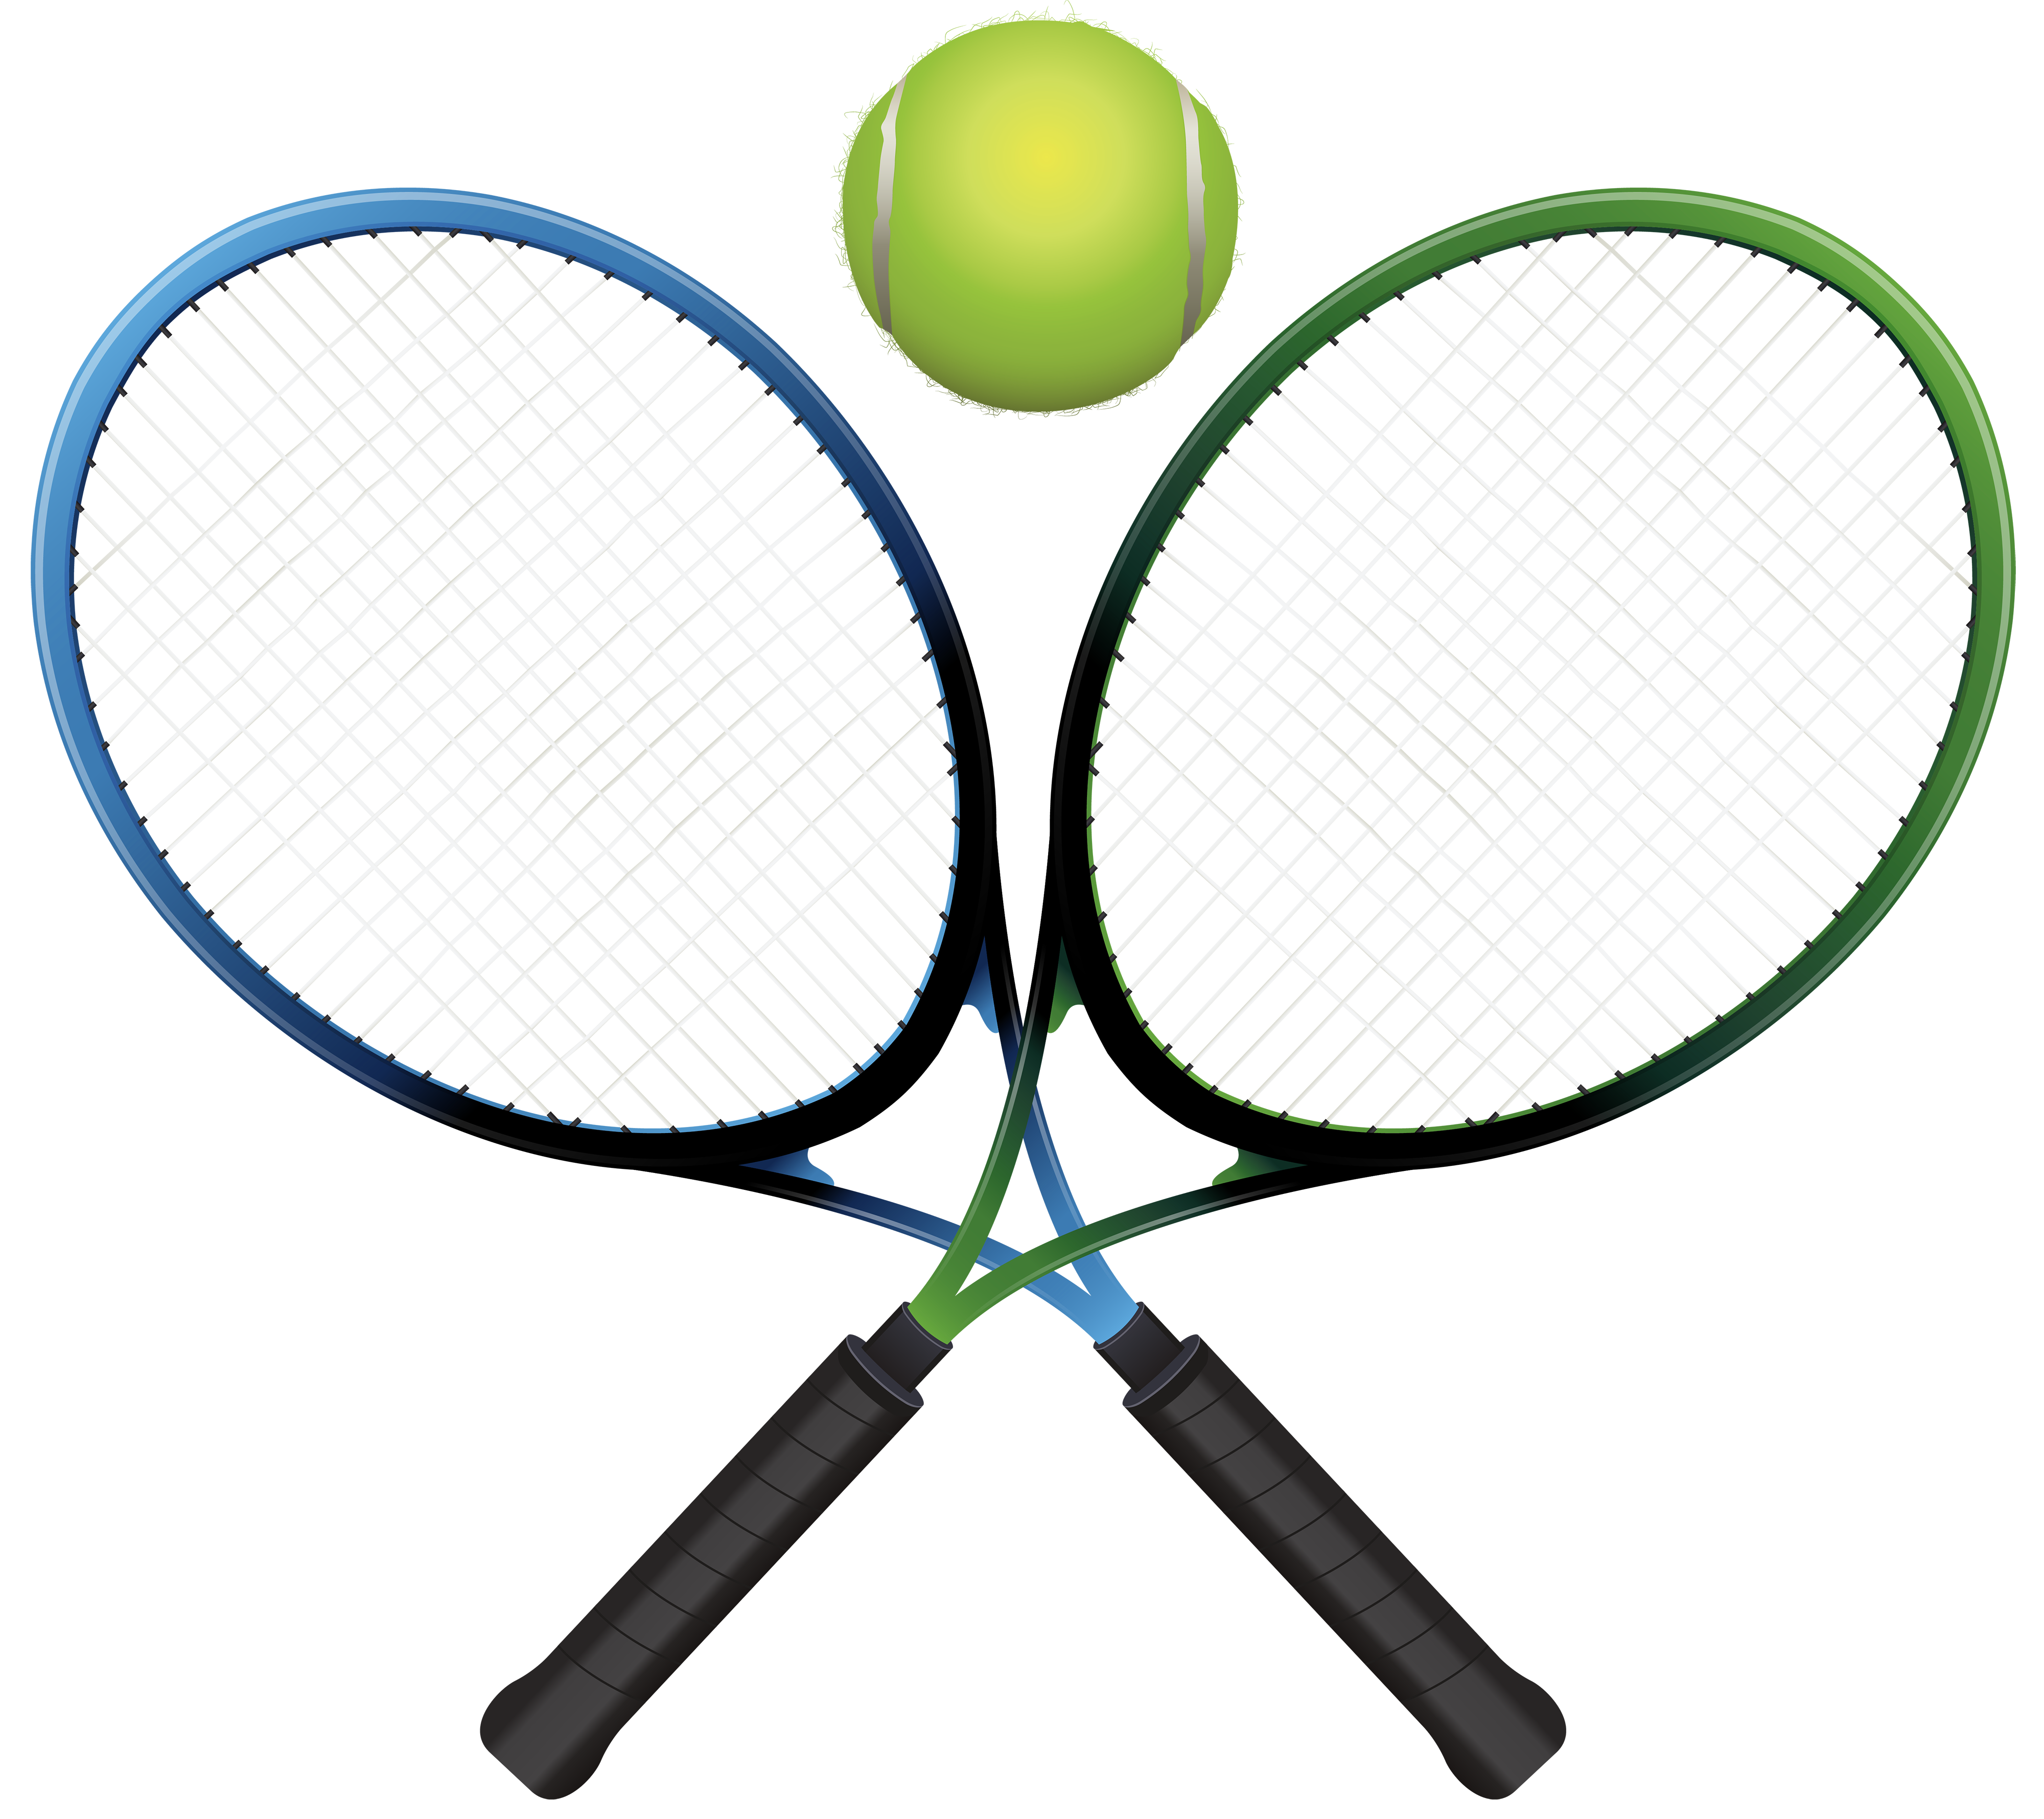 Tennis ball and racket clip art free clipart images - Clipartix